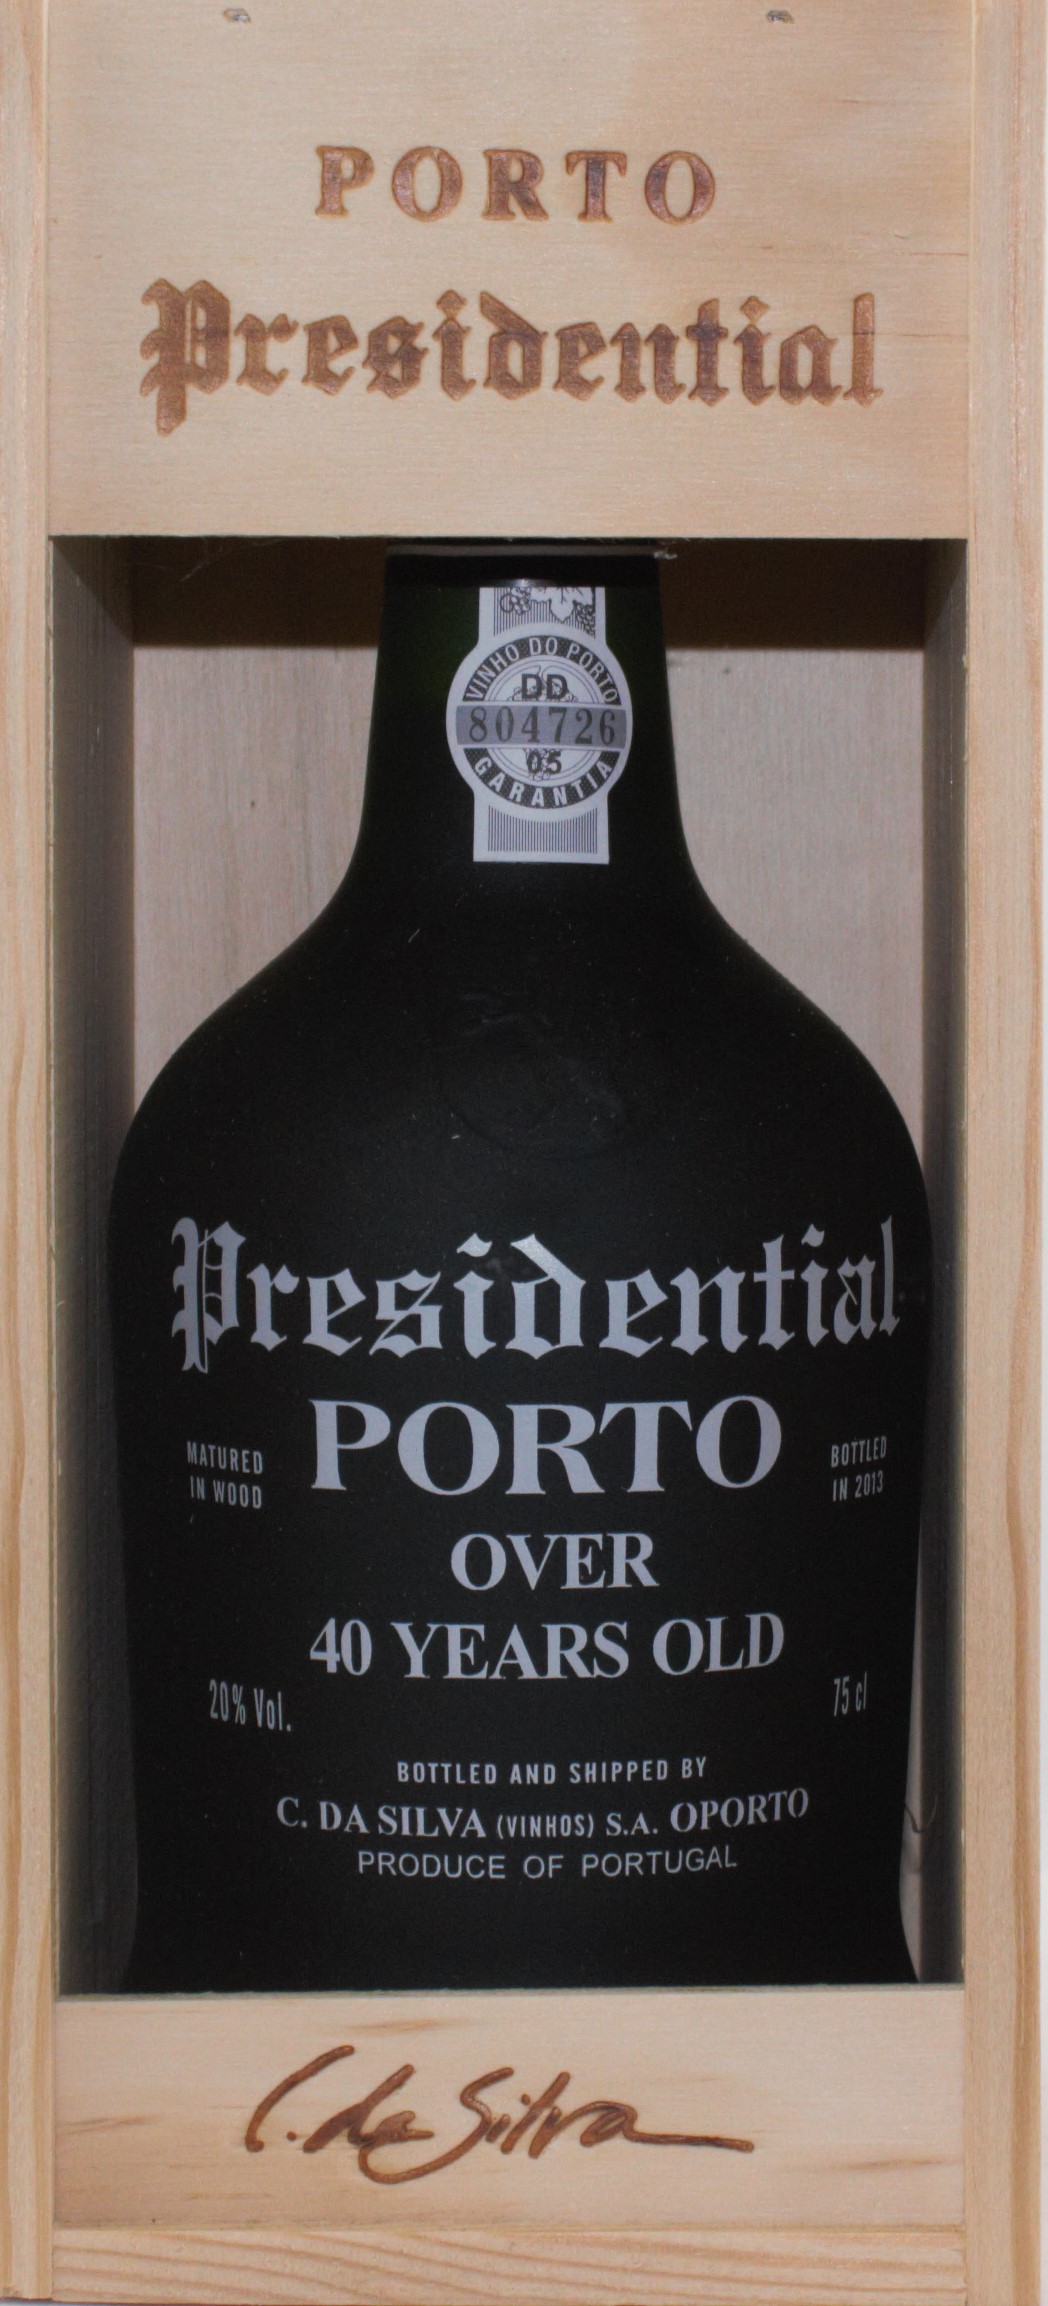 Presidential over 40 years old Tawny port